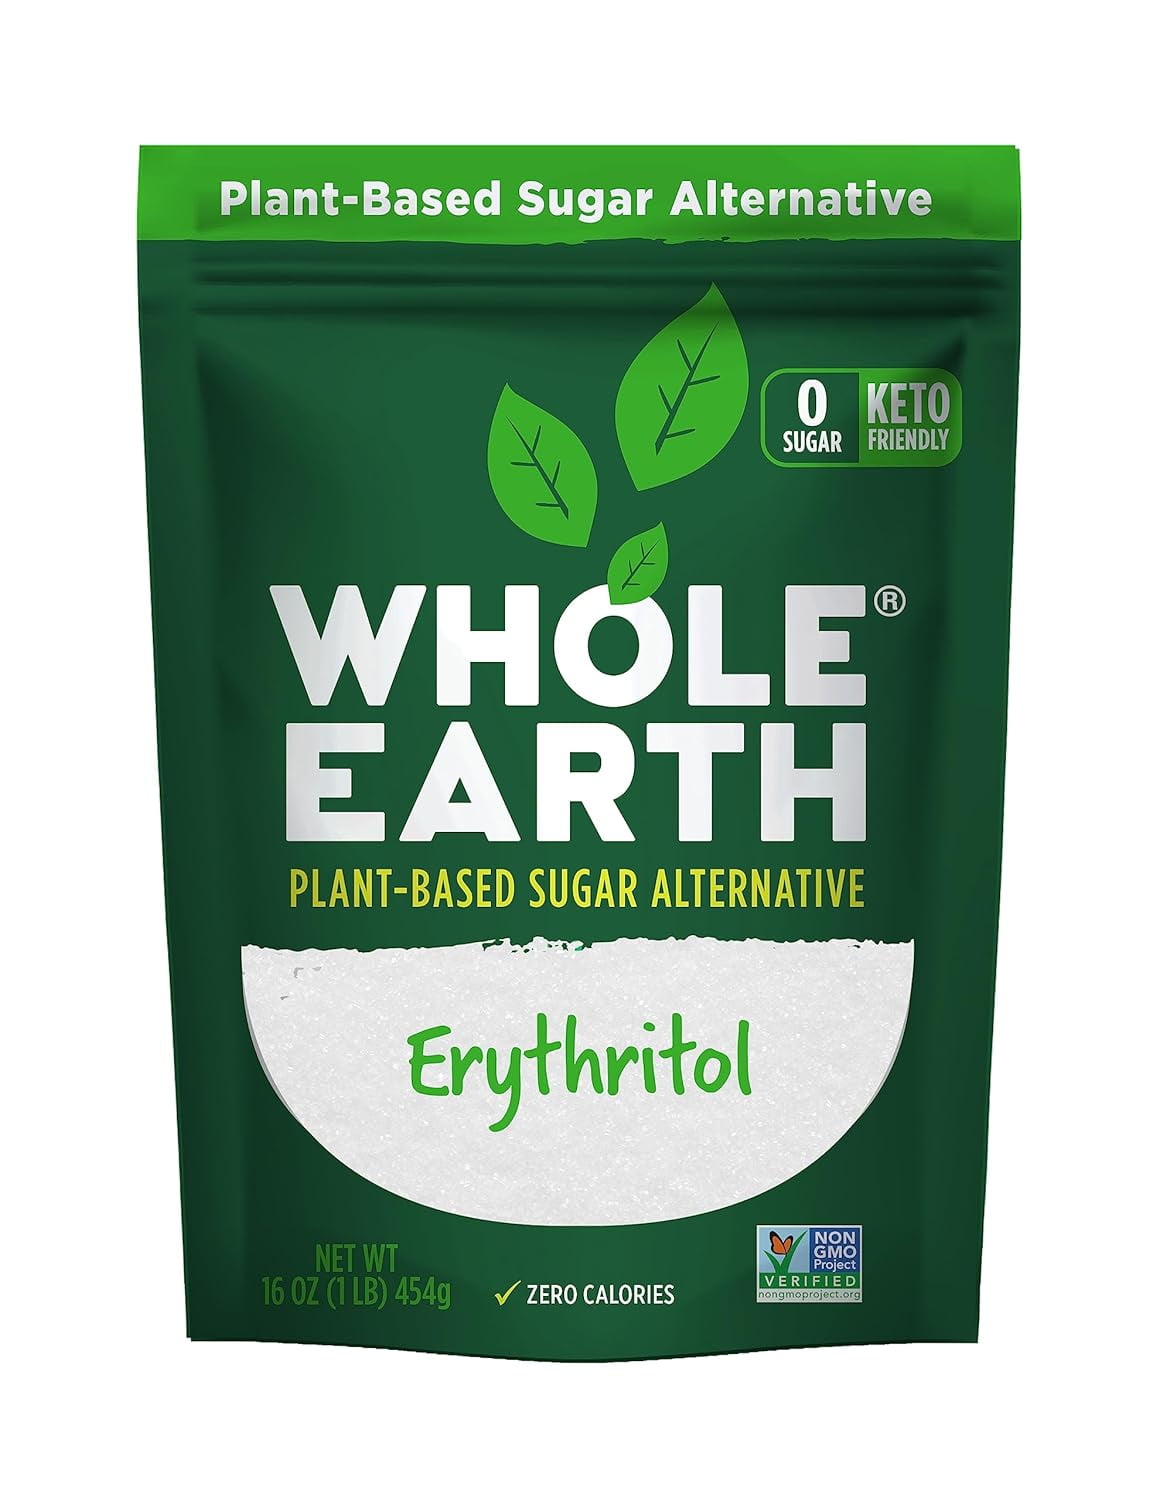 Must Try: Organic Granulated Erythritol